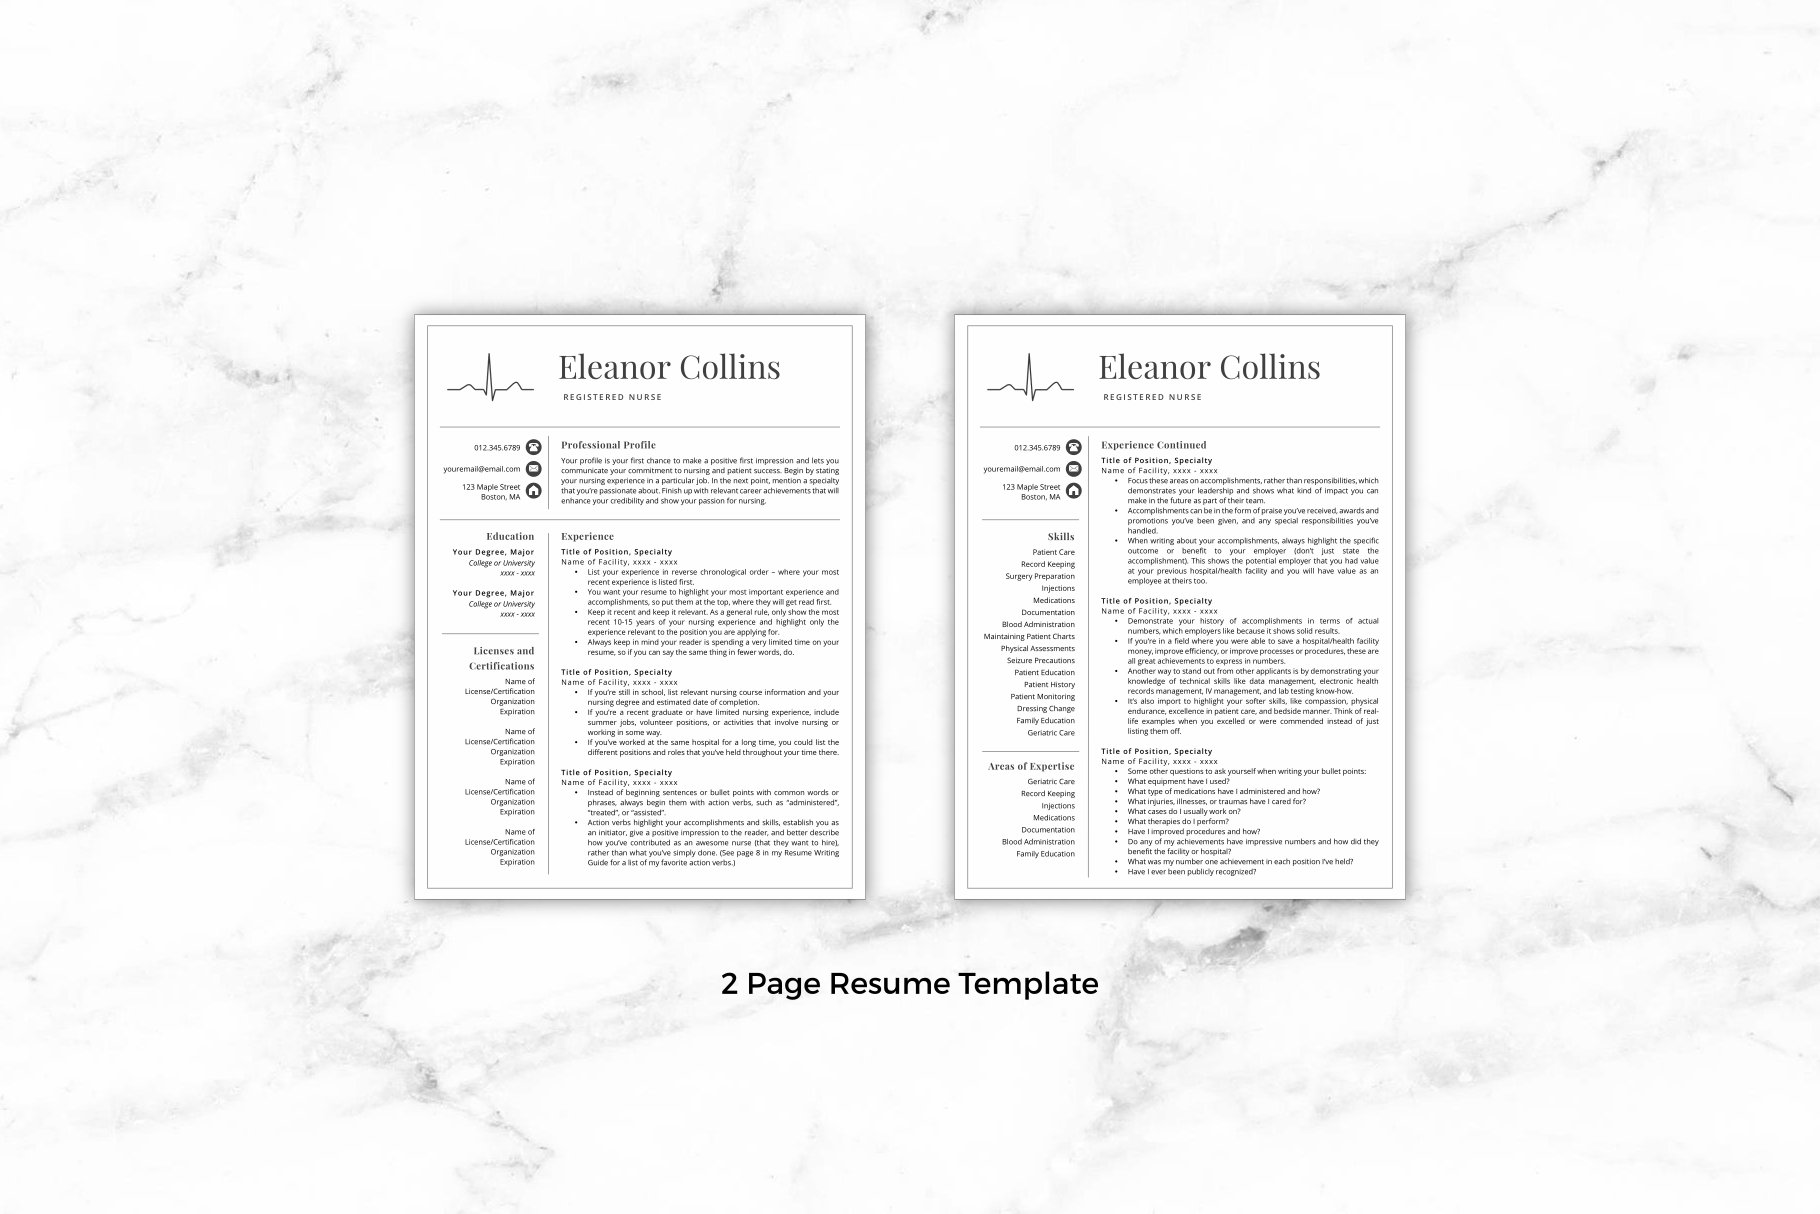 Two pages of a resume on a marble background.